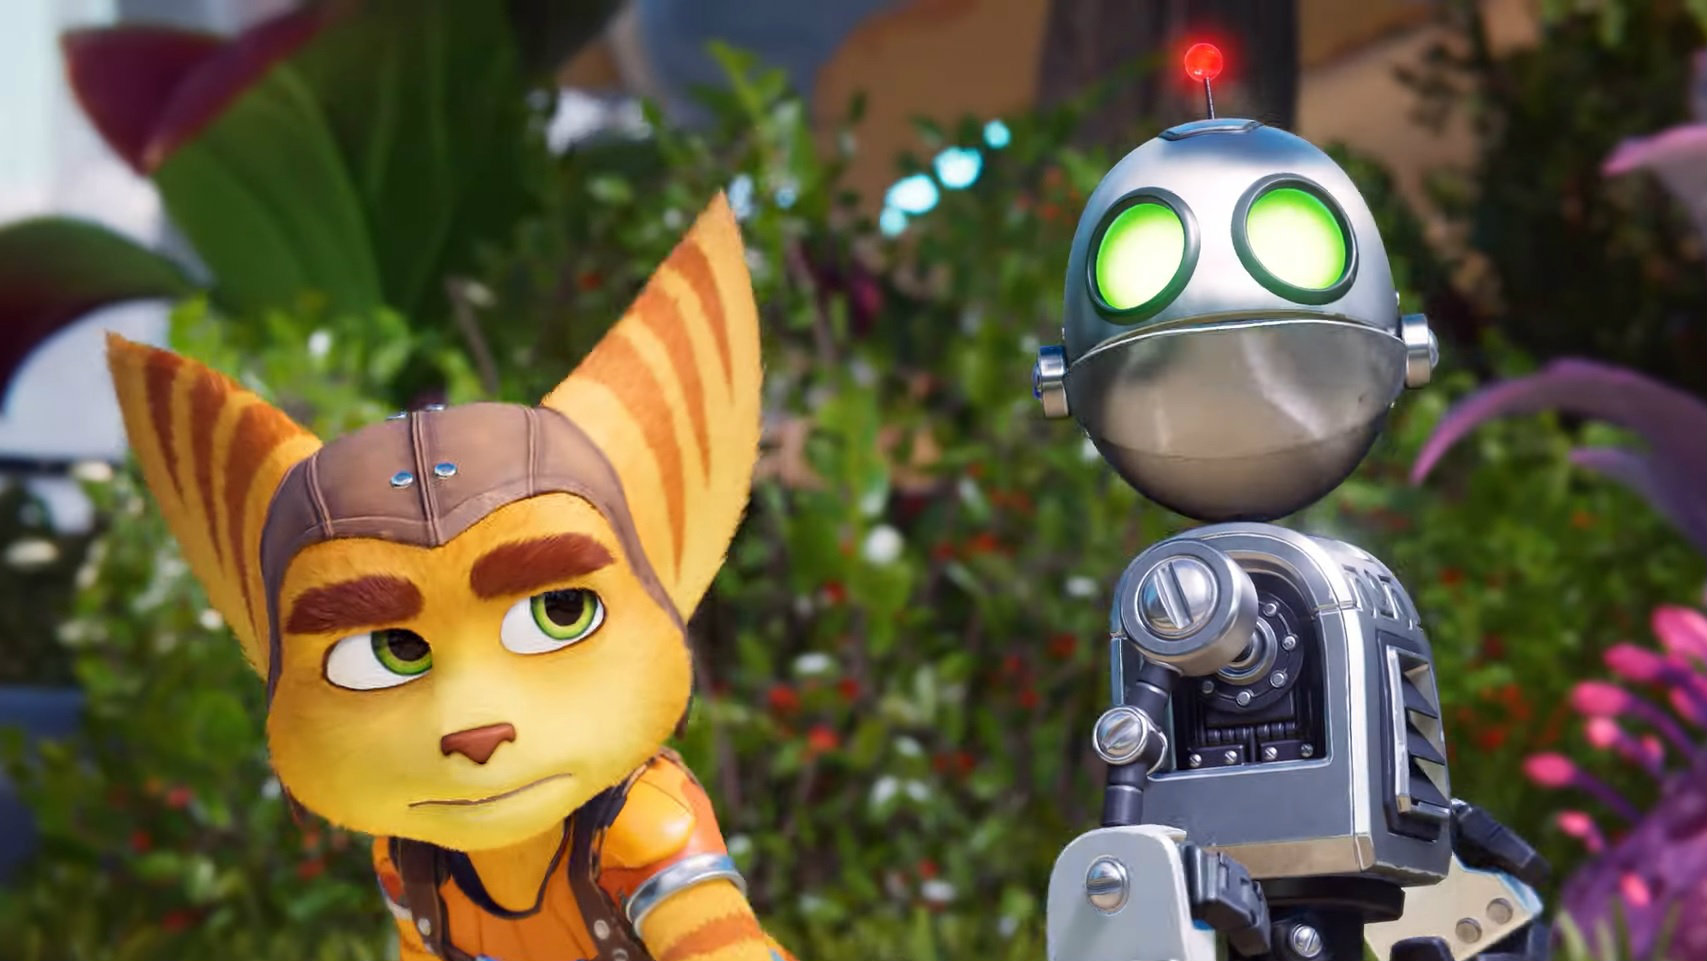 Ratchet & Clank: Rift Apart Gameplay Trailer Shows Power of PS5